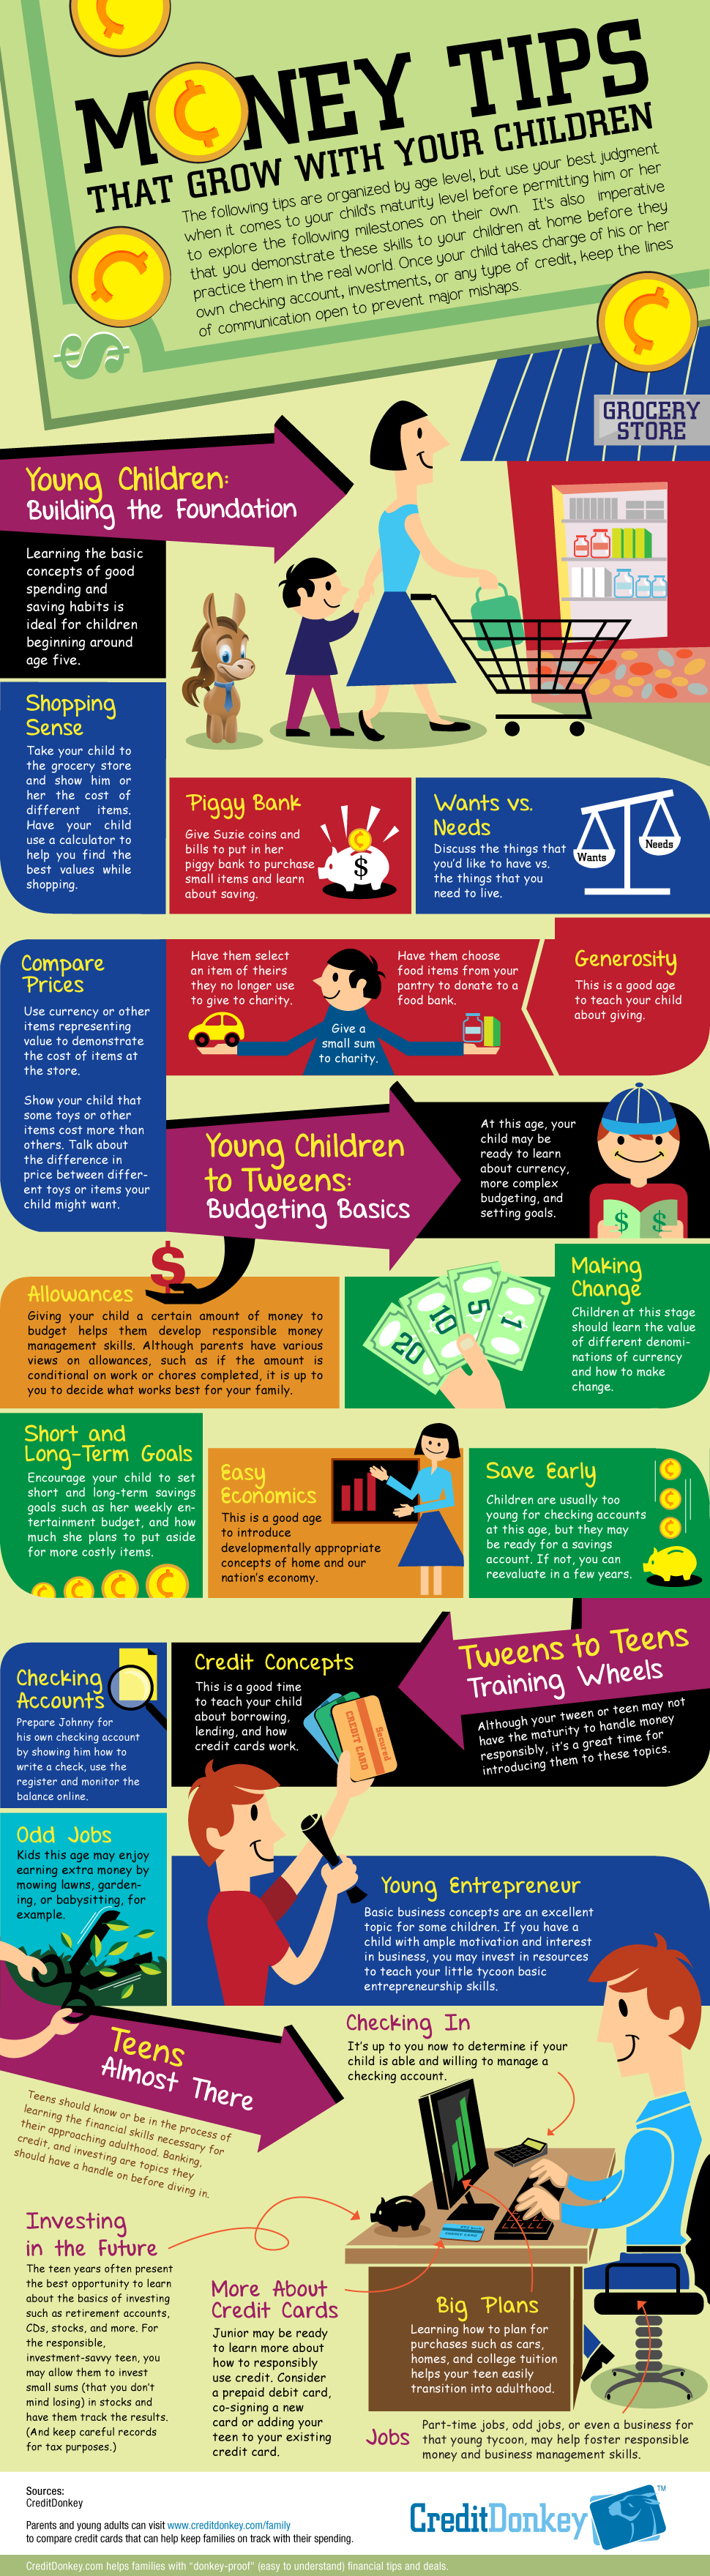 money tips that grow with your children" (infographic)-sageoak